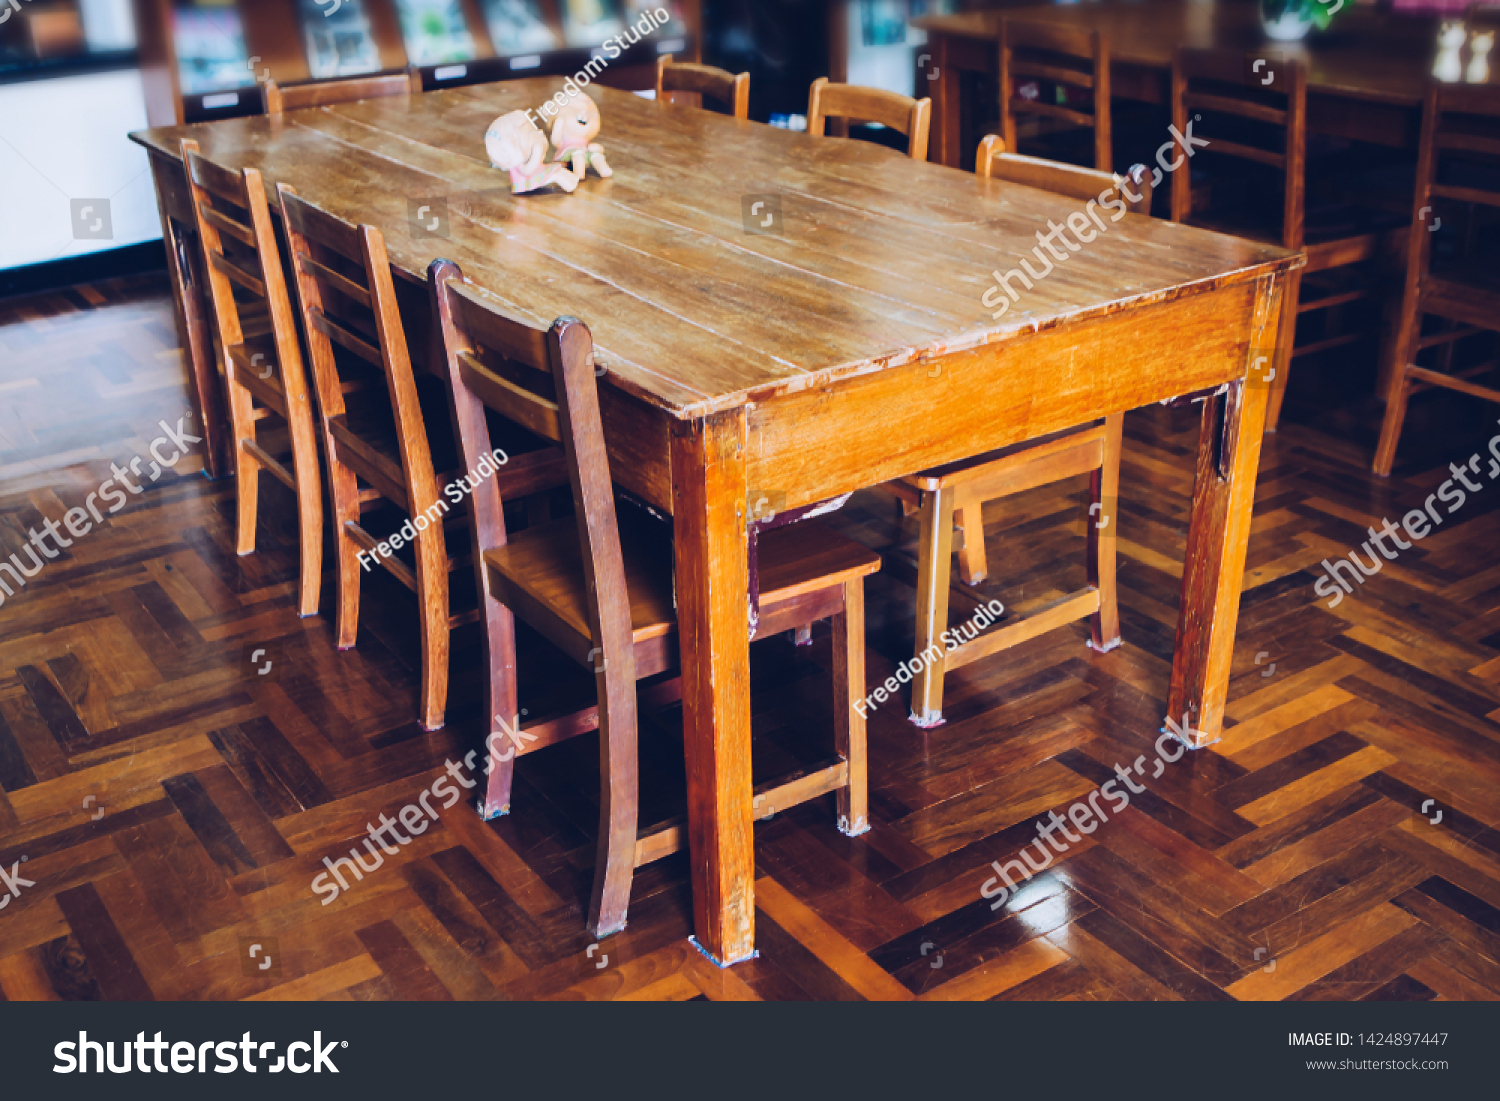 Vintage Teak Wooden Table Chairs On Stock Photo Edit Now 1424897447